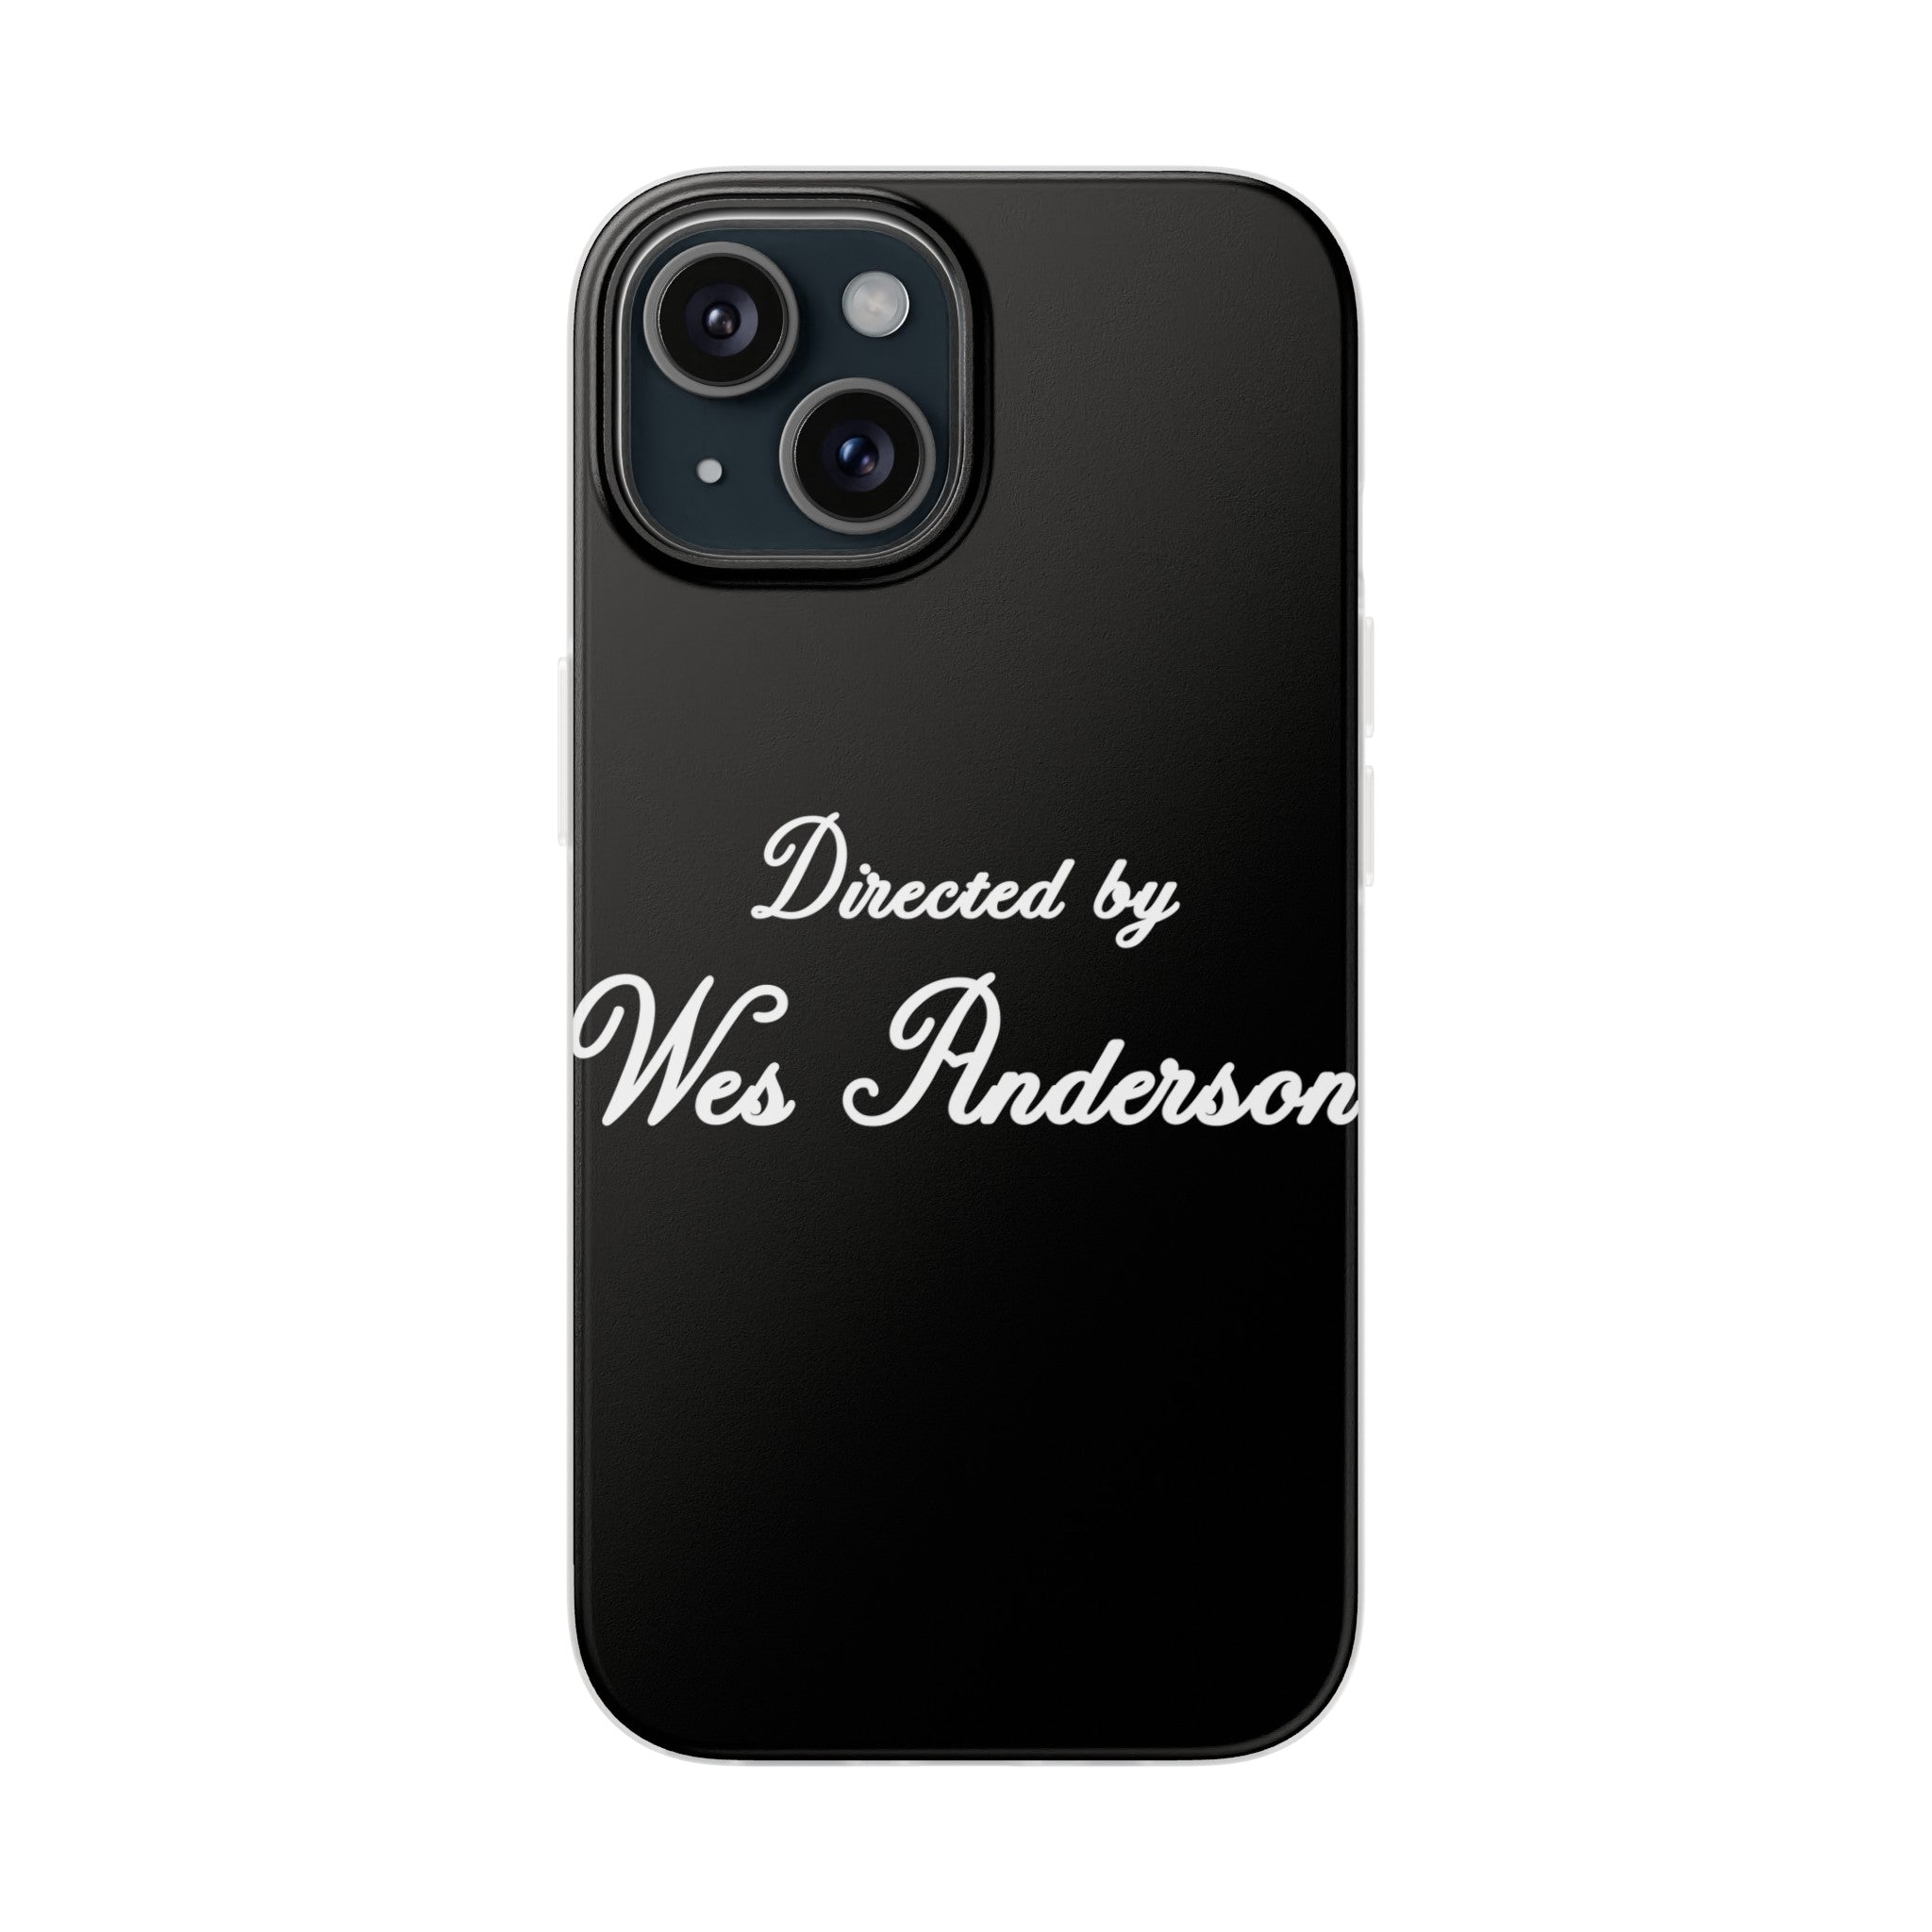 Wes Anderson - Phone Case